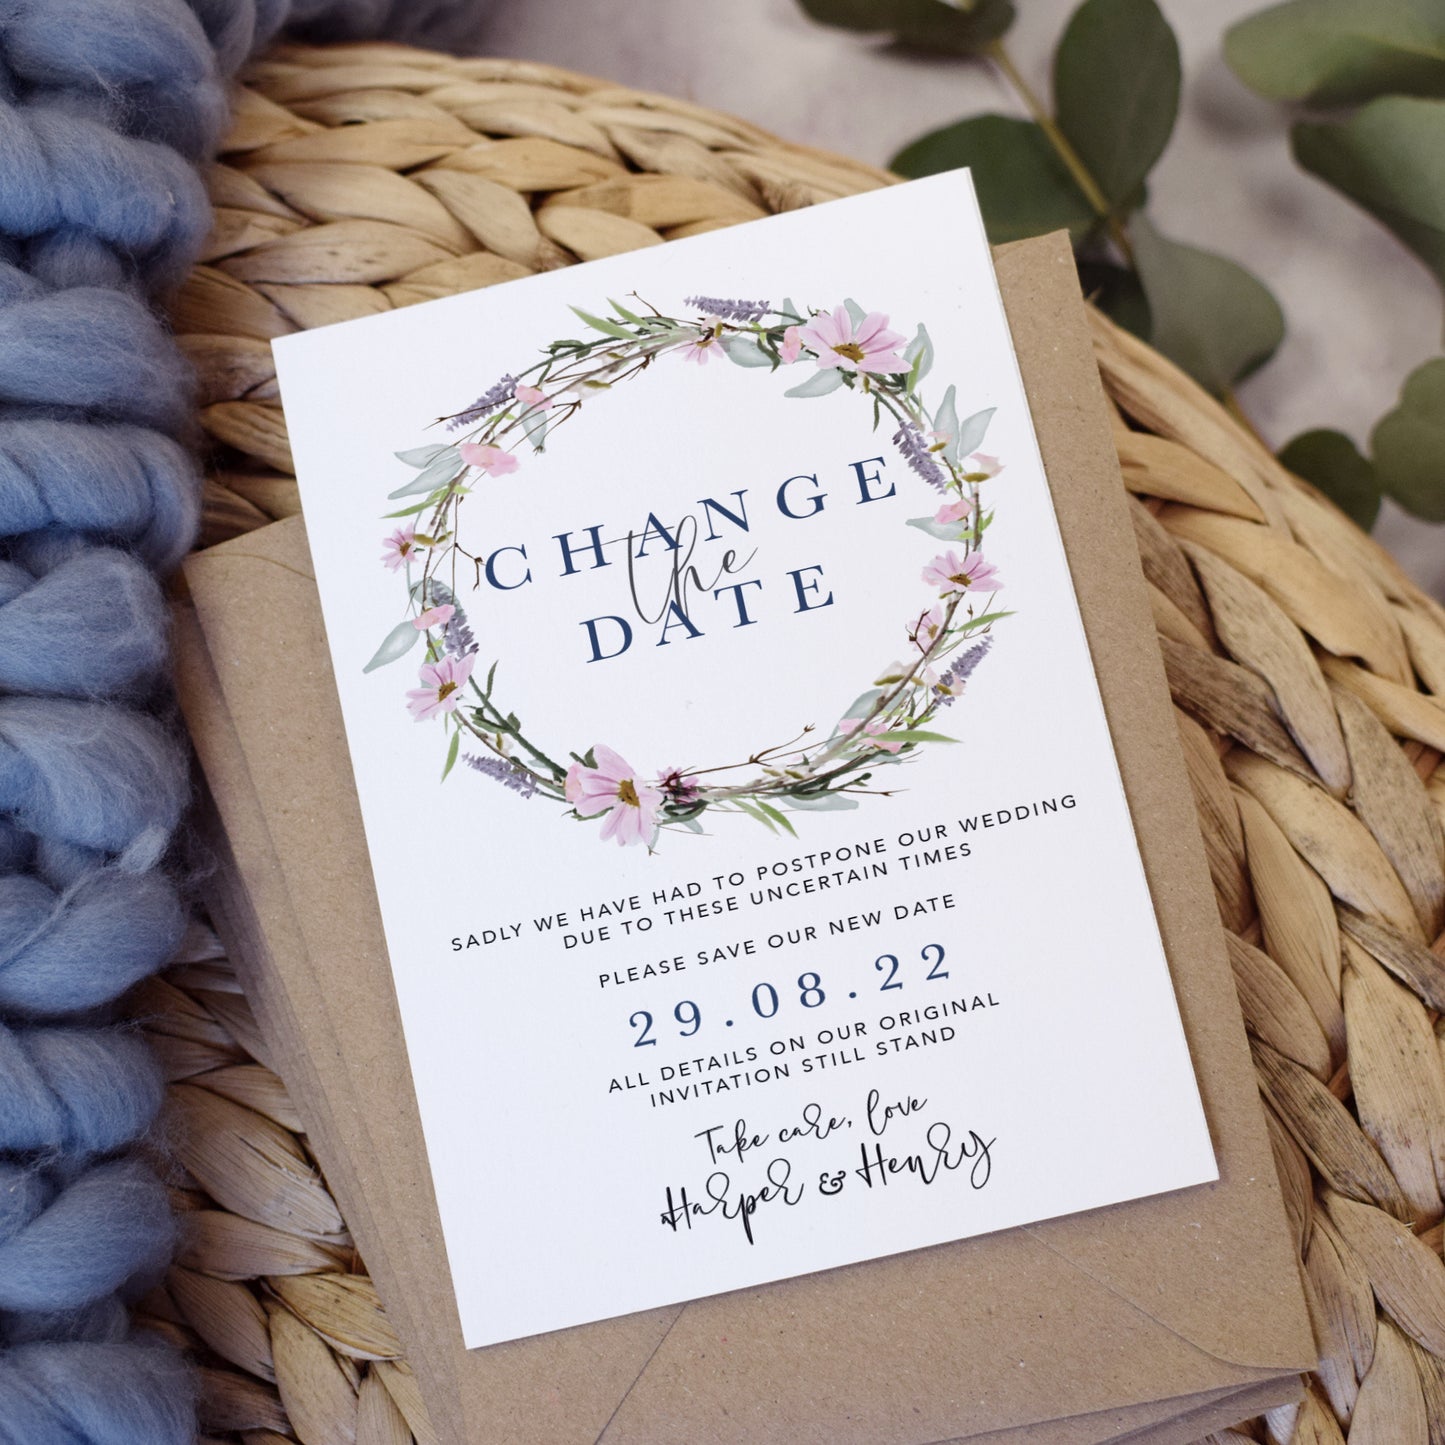 'Whisper Wreath' Wedding Change the Date cards